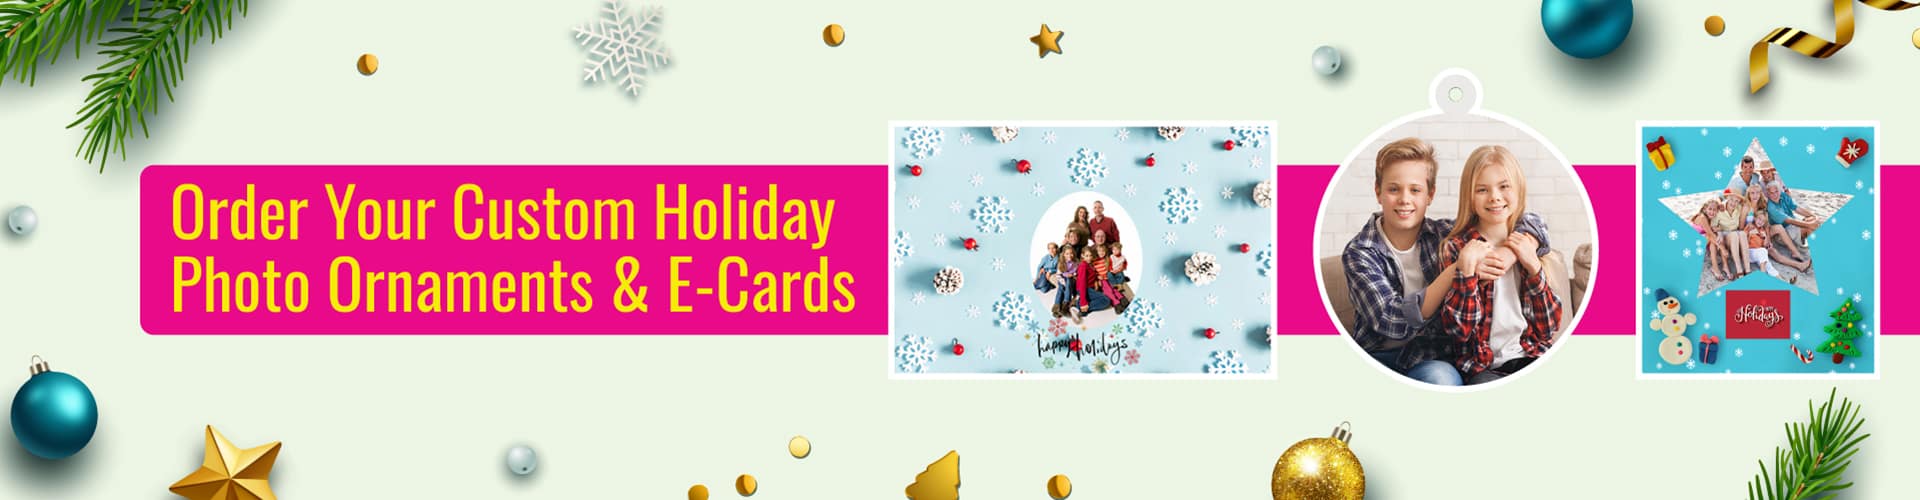 Holiday gifts and e-cards